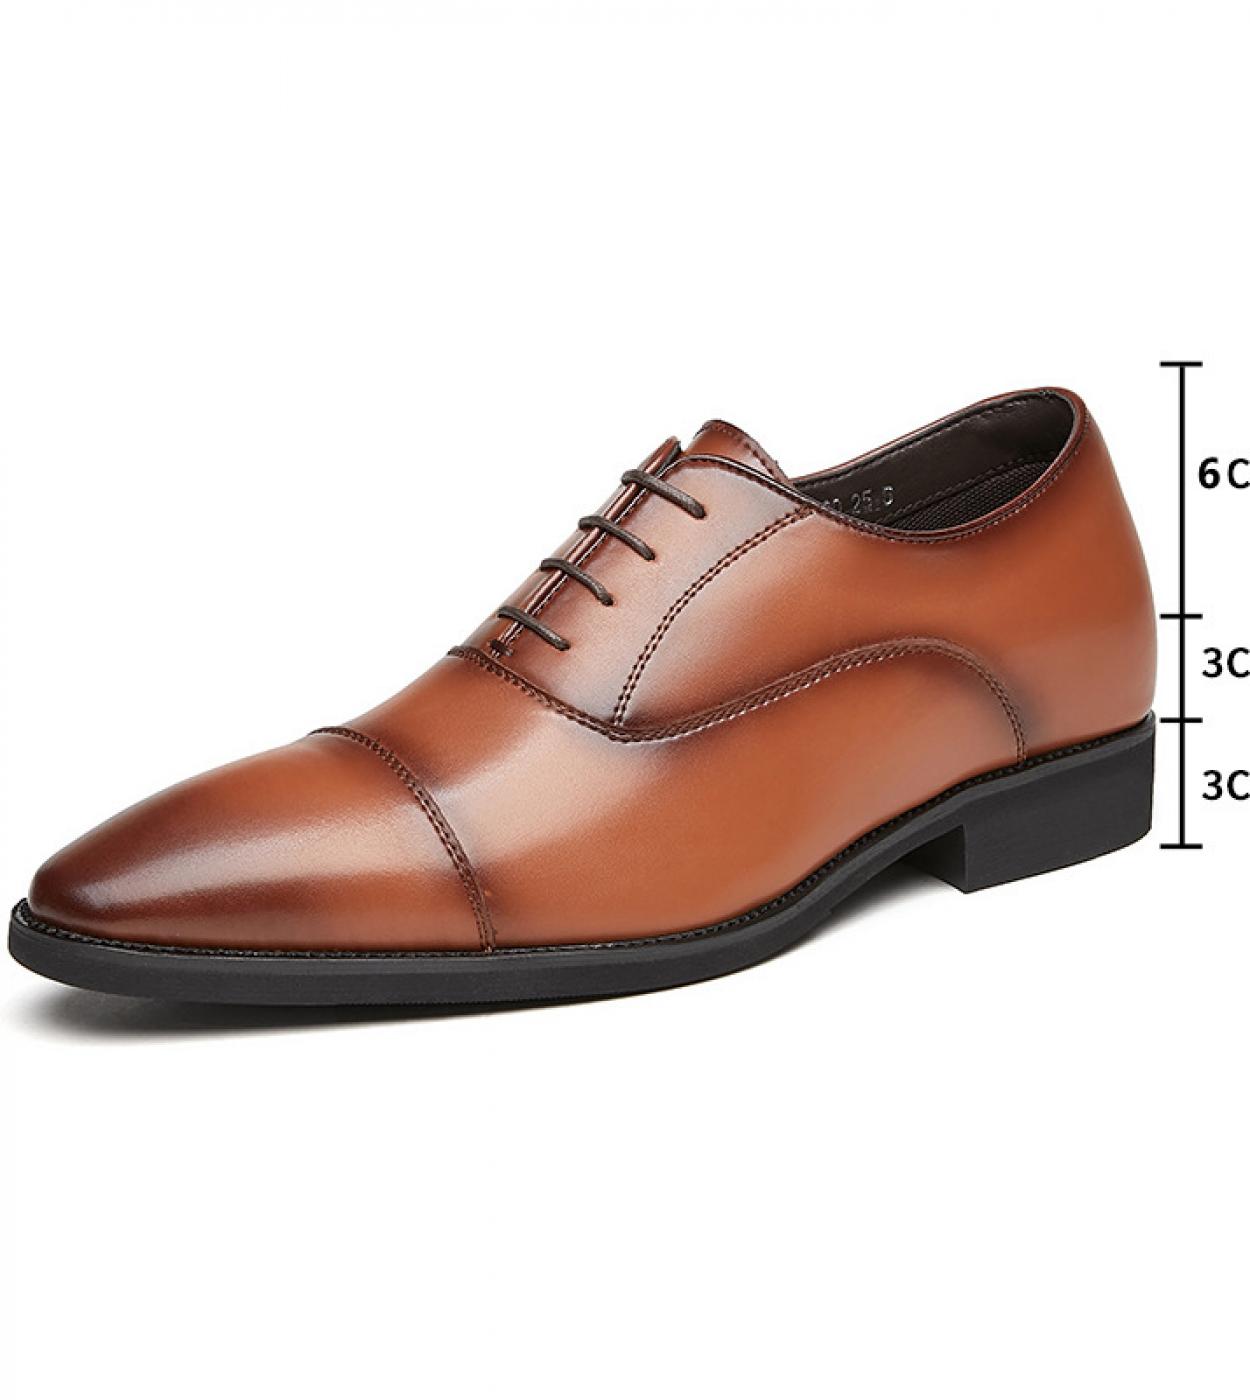  Men Formal Leather Shoes Inner Heightened 6 Cm Mens Business Shoes Oxford Pointed Toe Mens Wedding Shoe  Mens Dress S